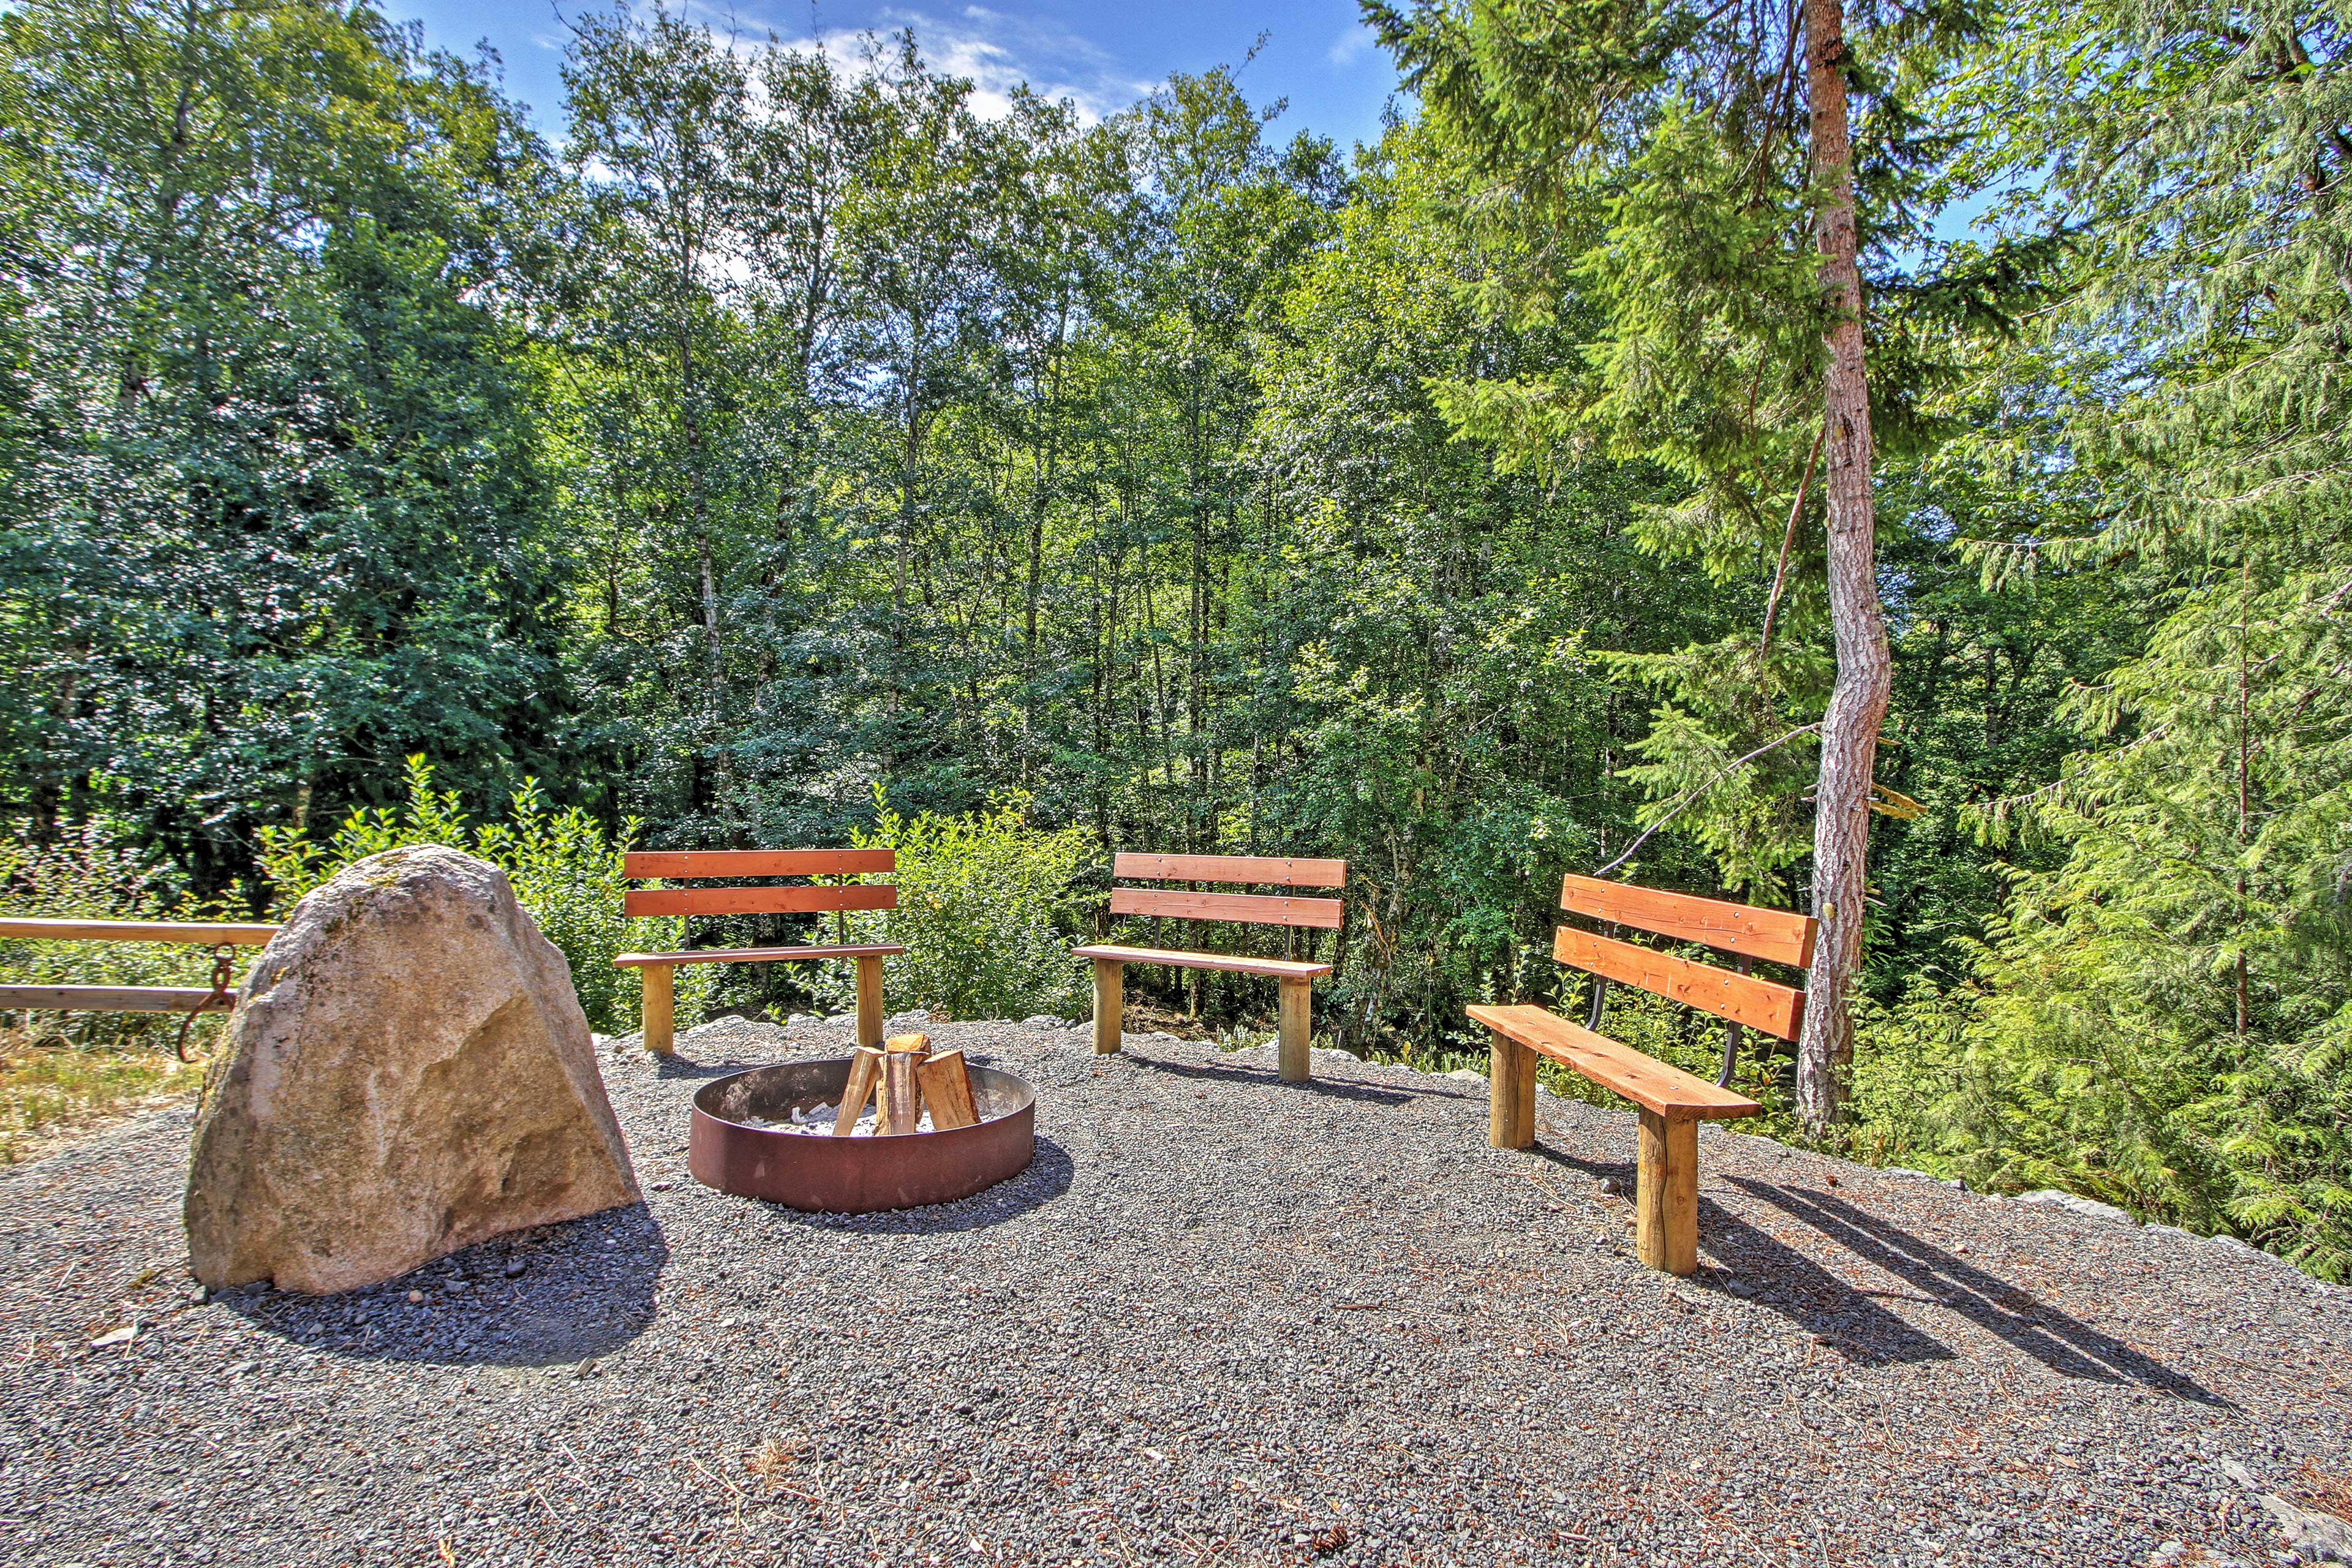 Exterior Space | 1 of 2 Fire Pits